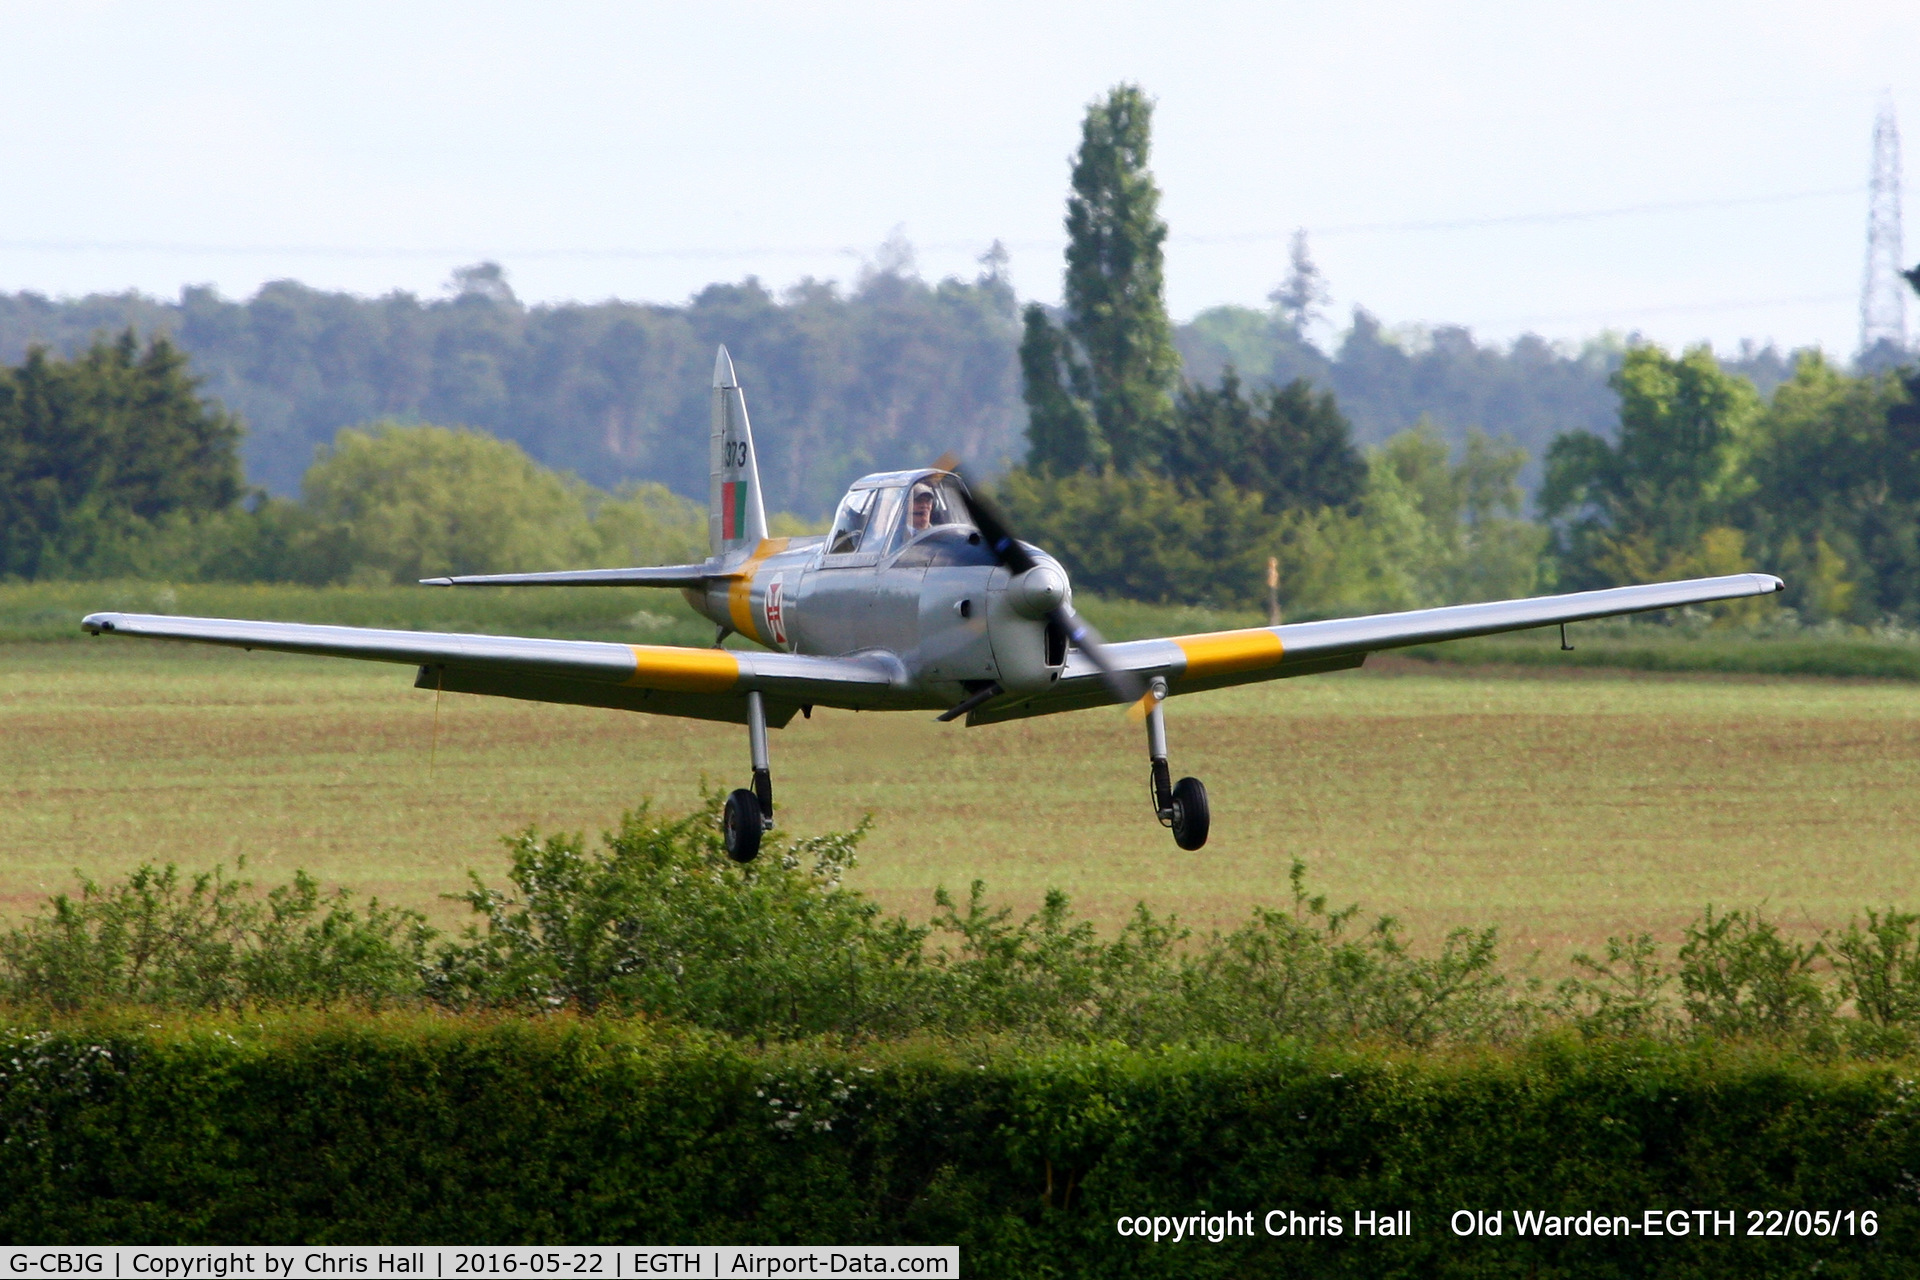 G-CBJG, 1961 OGMA DHC-1 Chipmunk T.20 C/N OGMA-63, 70th Anniversary of the first flight of the de Havilland Chipmunk Fly-In at Old Warden